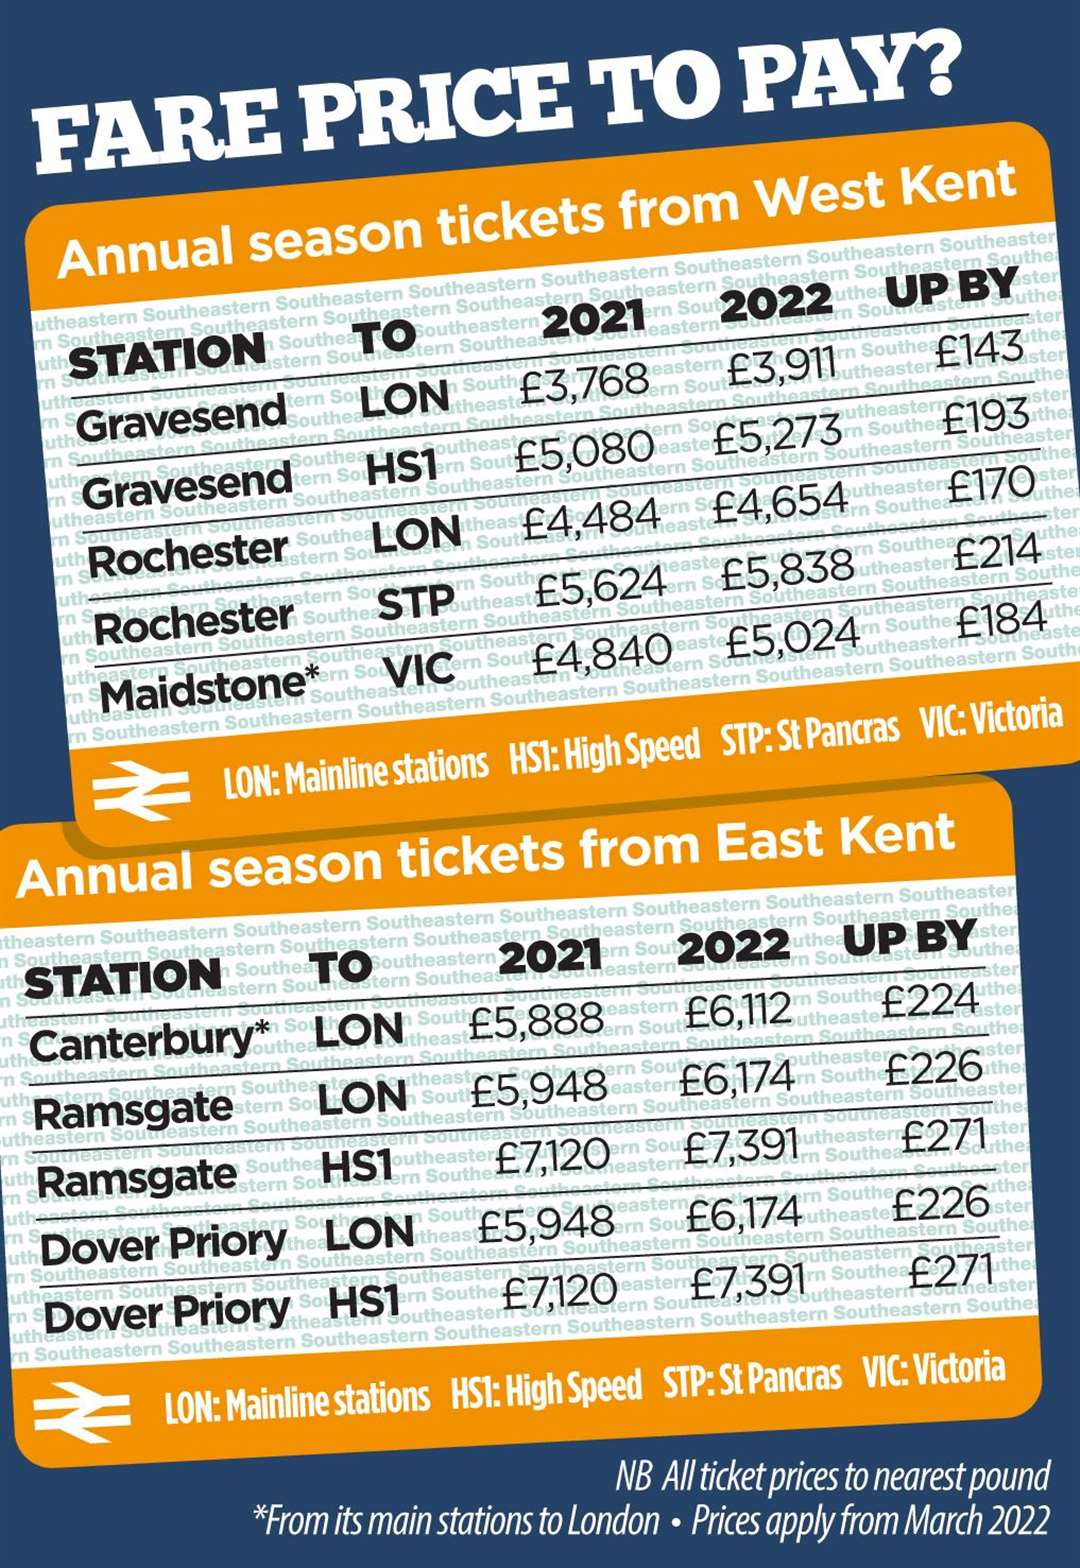 Annual season ticket prices and what they will rise to (note) Maidstone and Canterbury have asterisks to denote they have more than one station serving London.